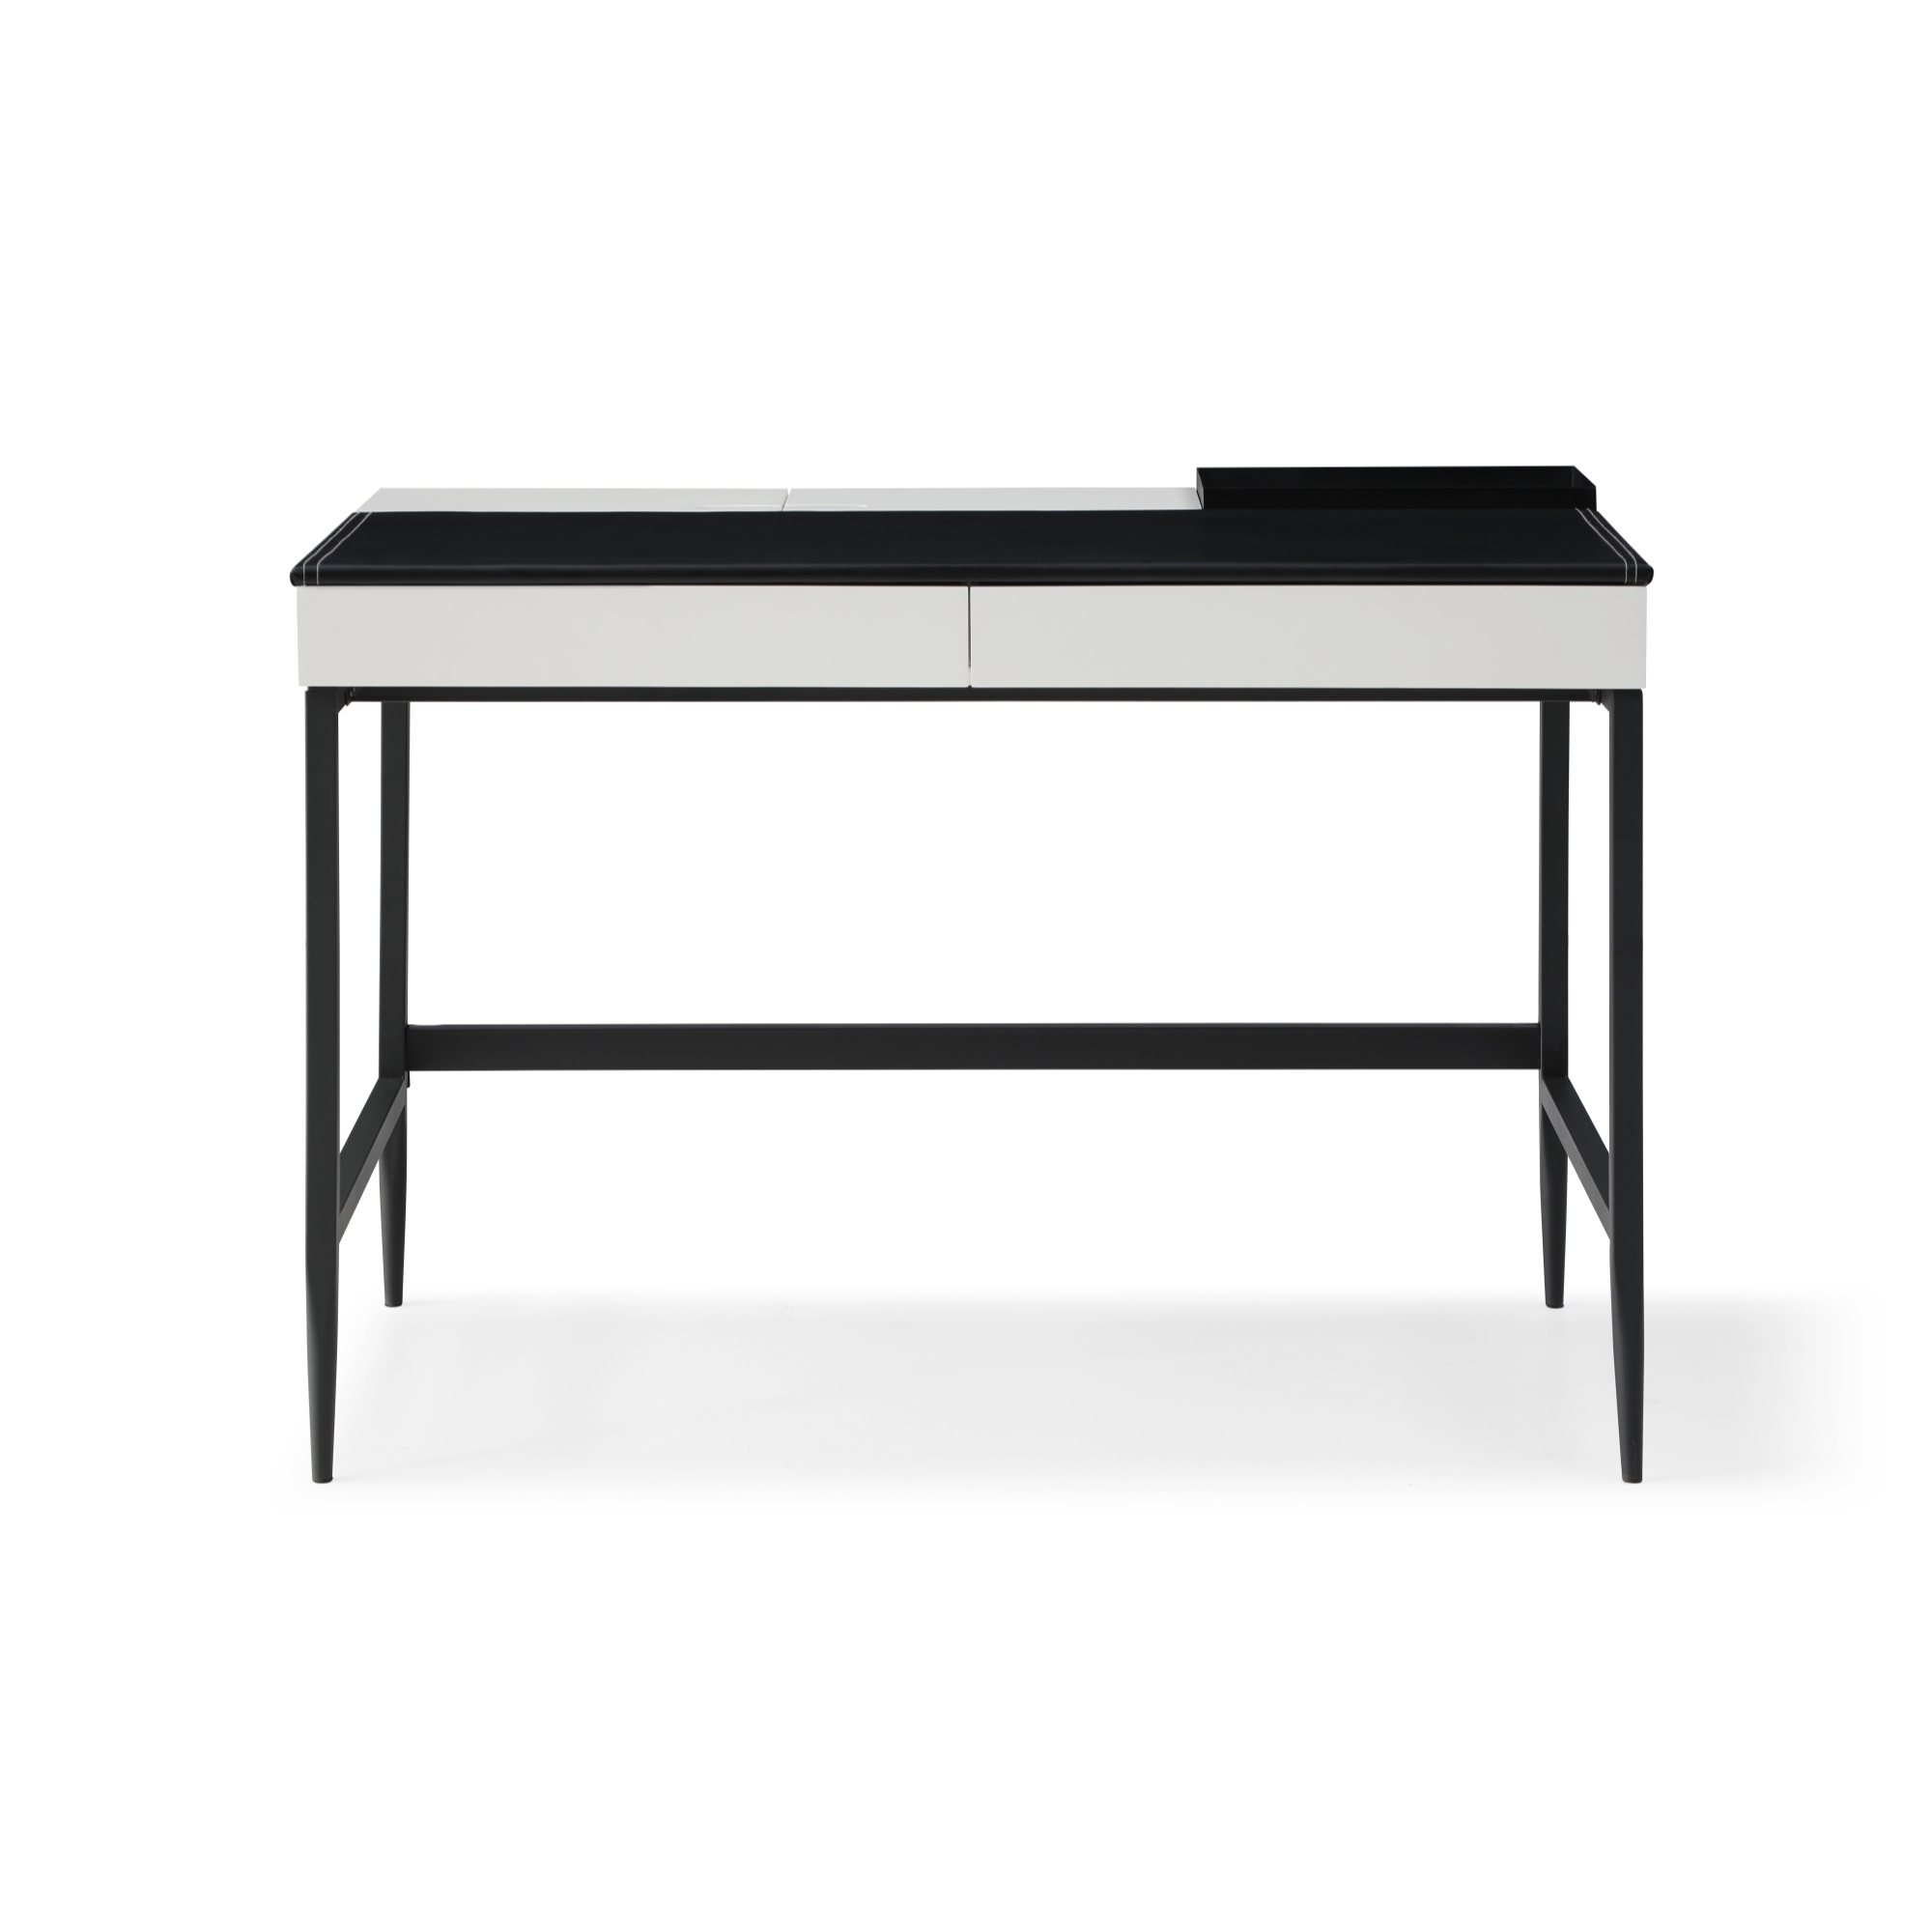 Duane Desk-2 Storage Drawers-Storage Compartments With Hinged Lid-Leather Desk Pad - Black/white